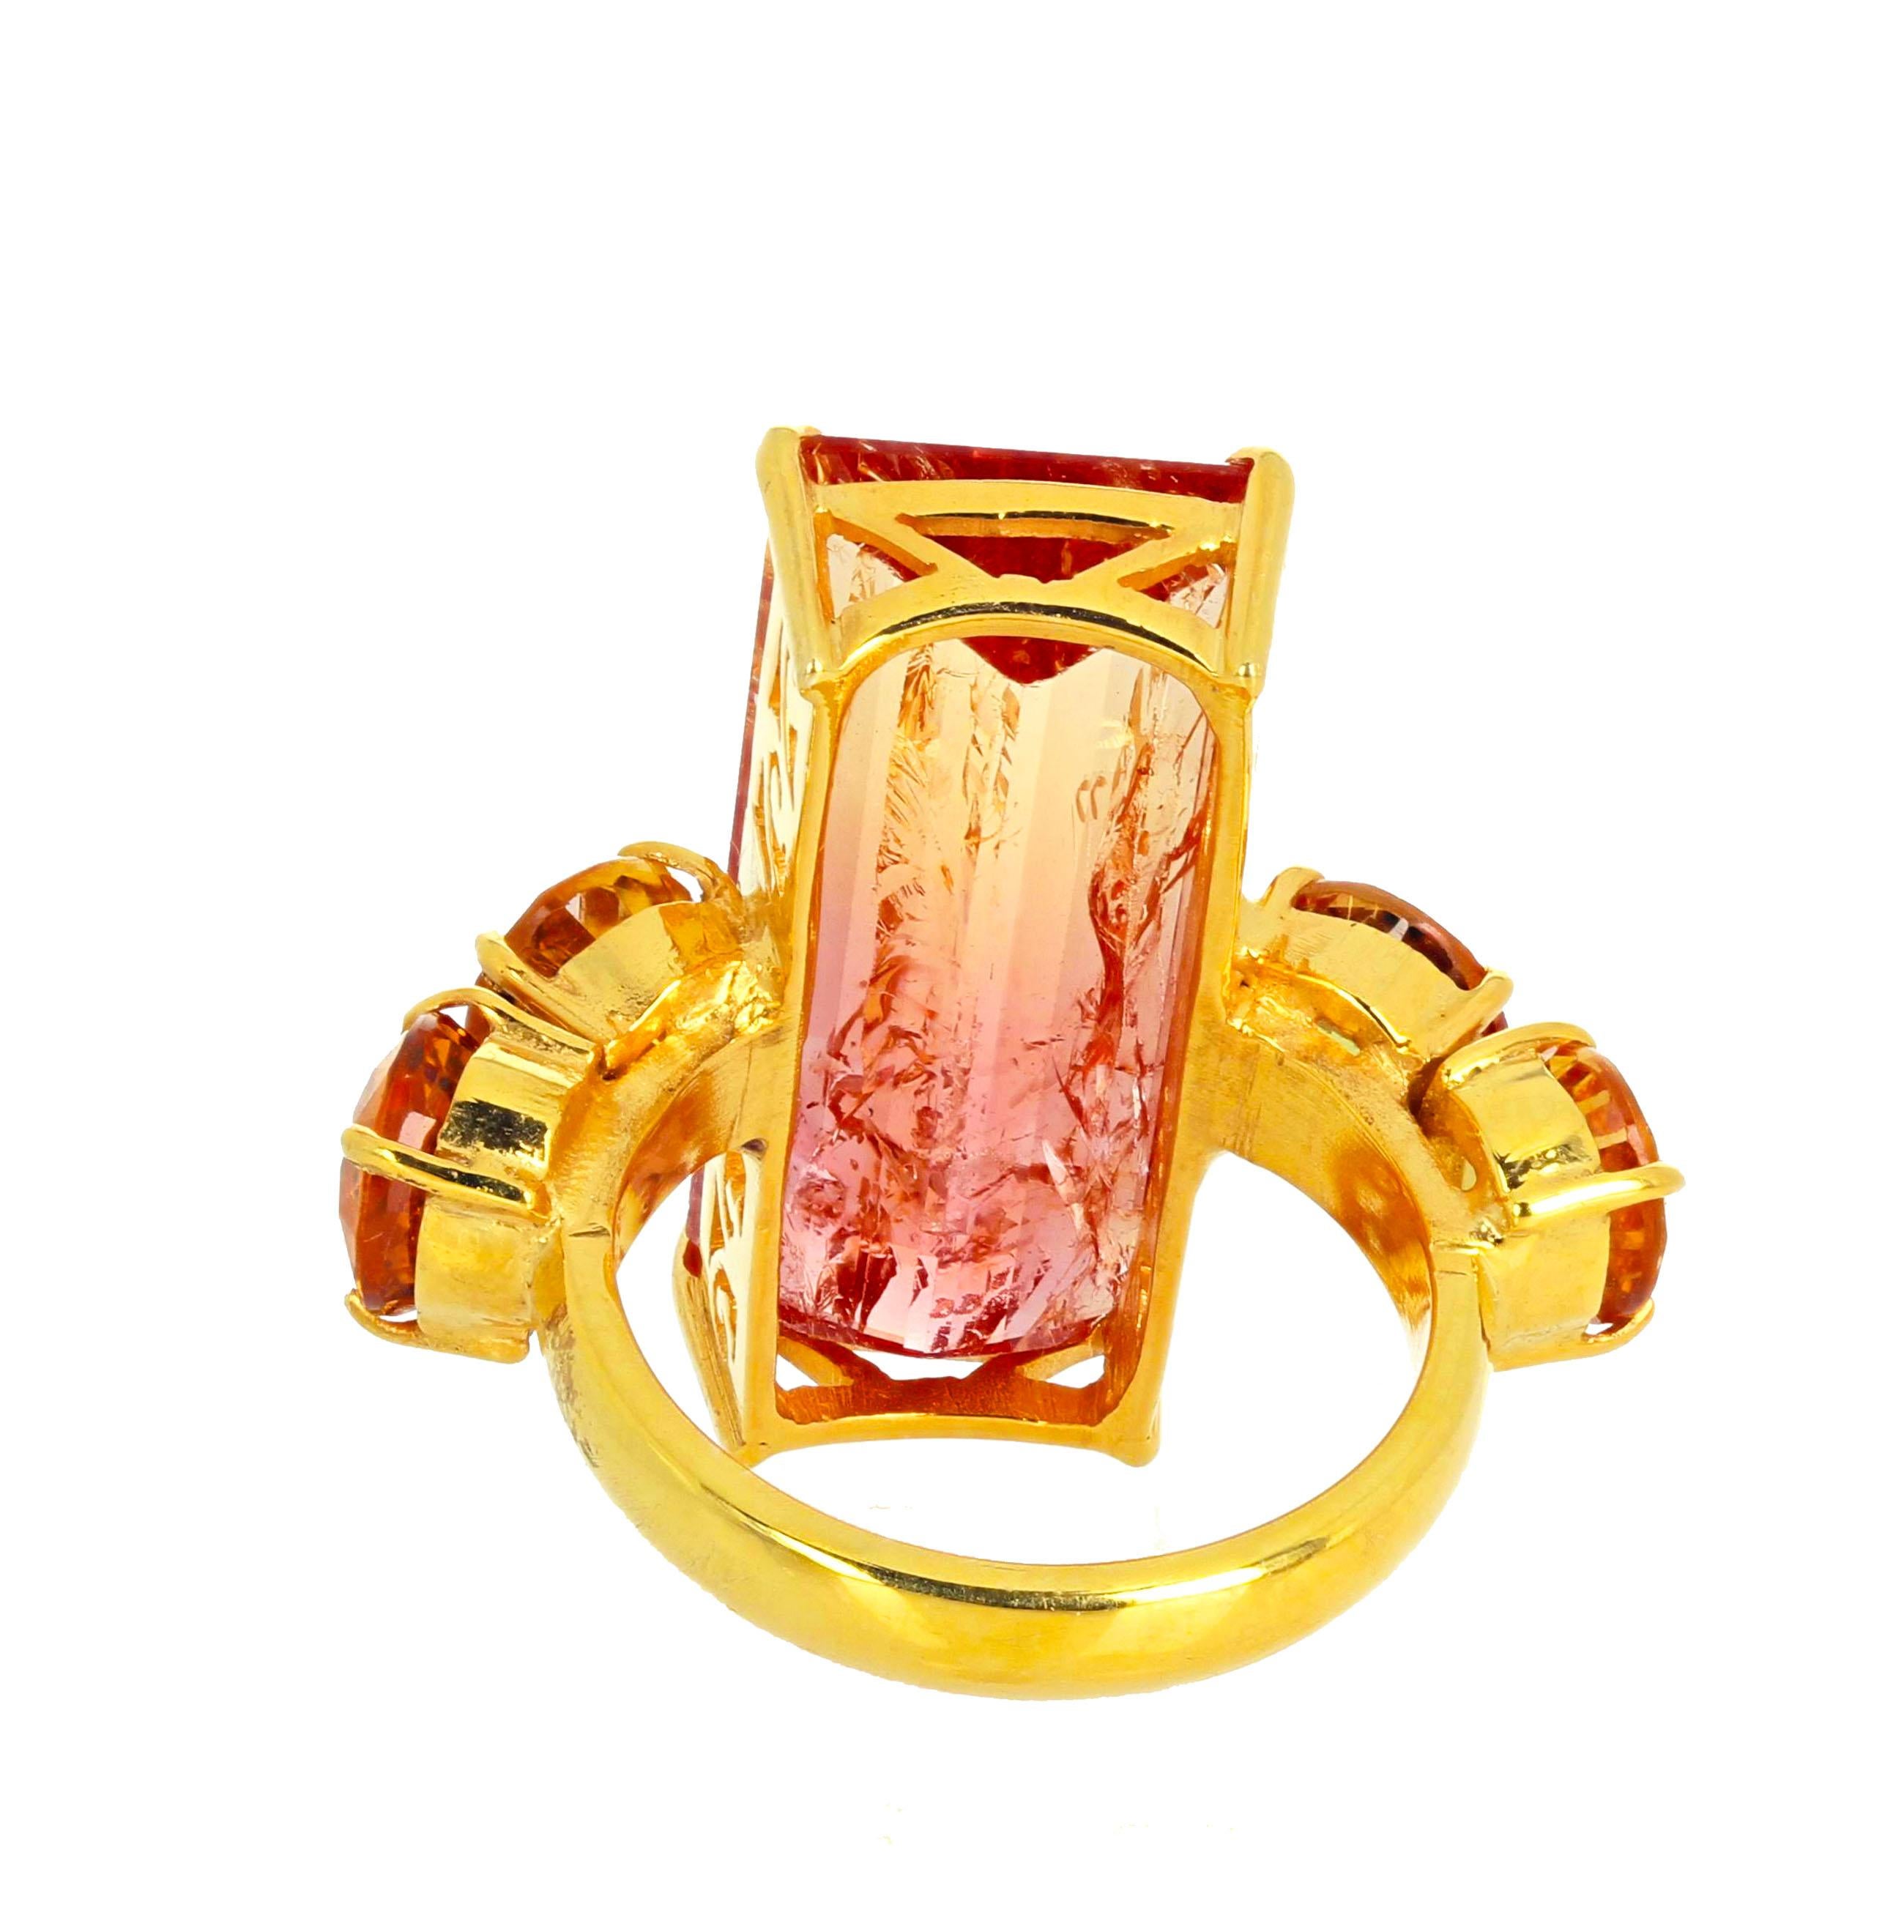 Women's or Men's Gemjunky Magnificent 20.41 Carat Magic Colors Citrine and Songea Sapphires Ring